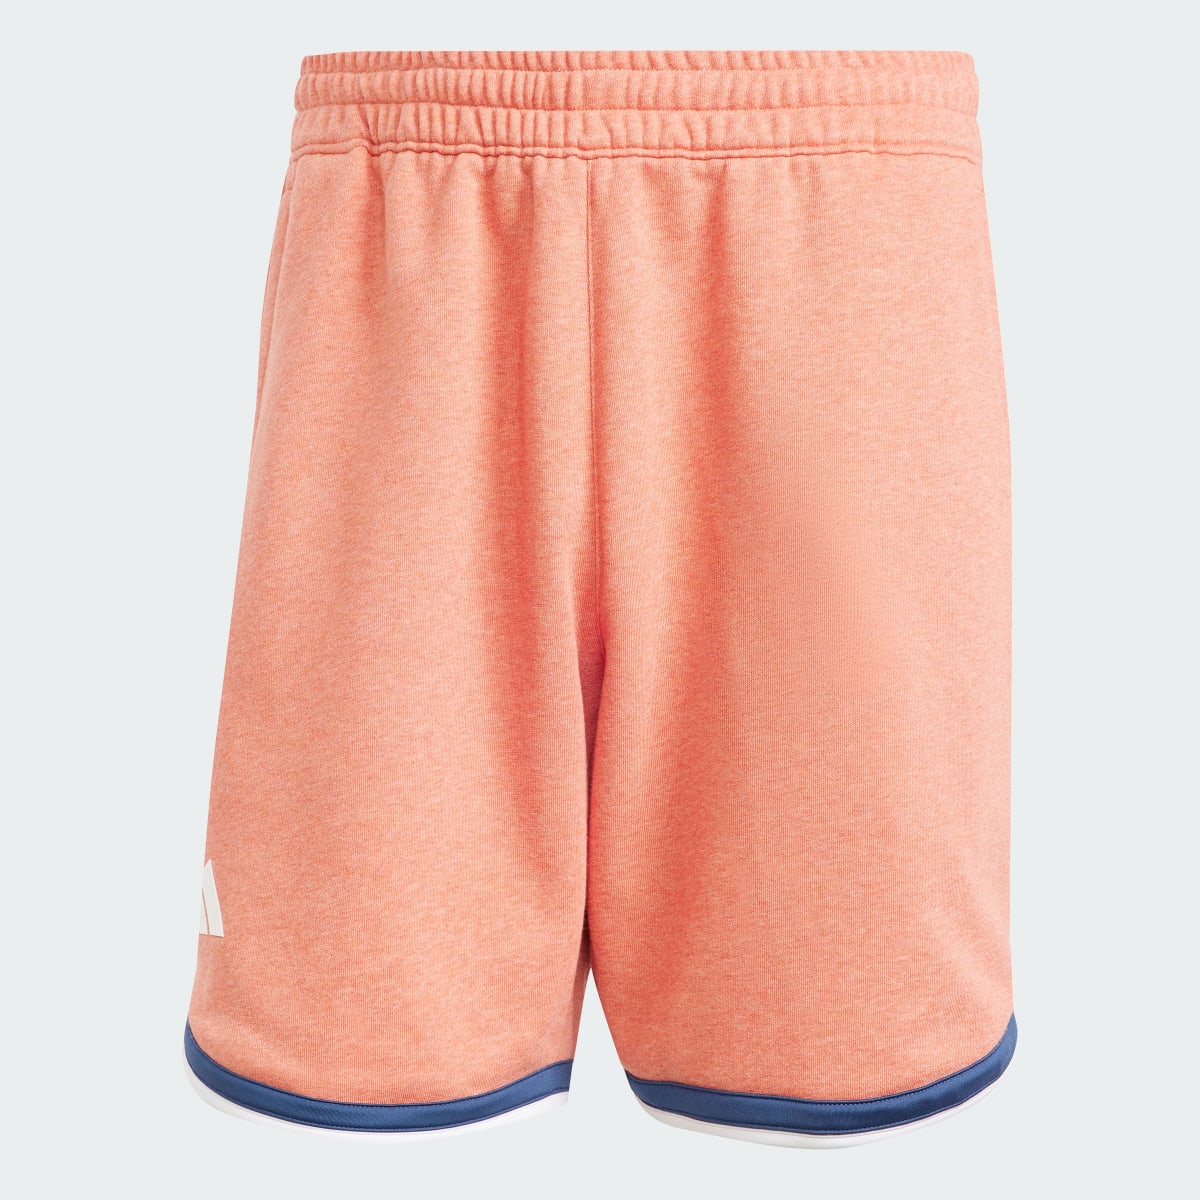 Adidas Clubhouse Classic French Terry Premium Shorts. 4